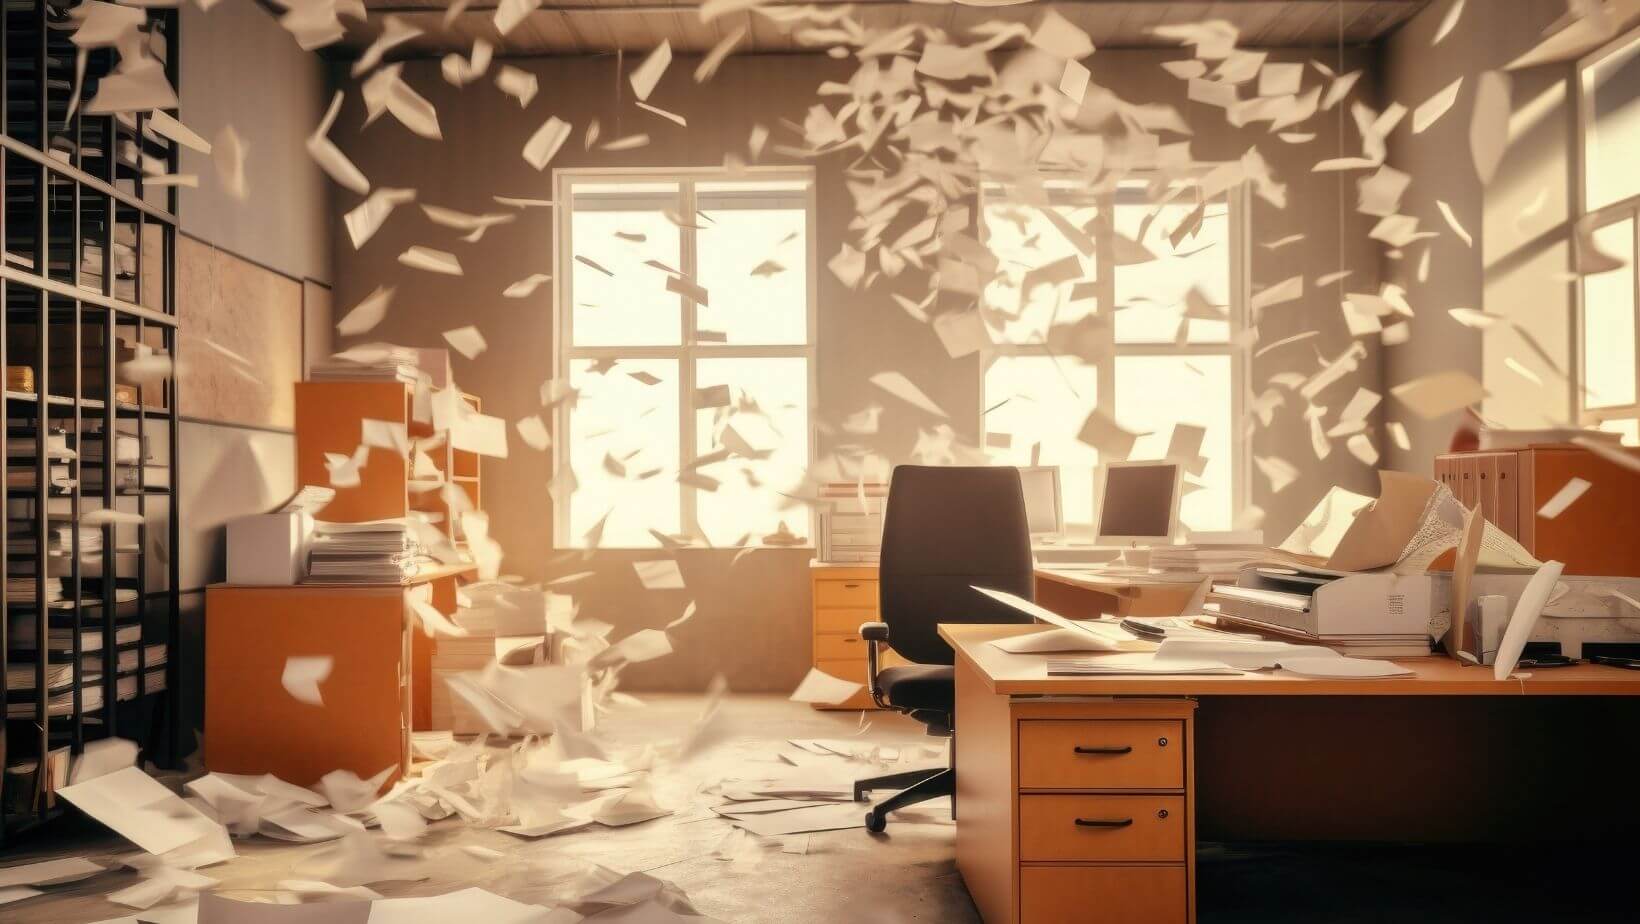 Scary Consequences of Inadequate Document Destruction